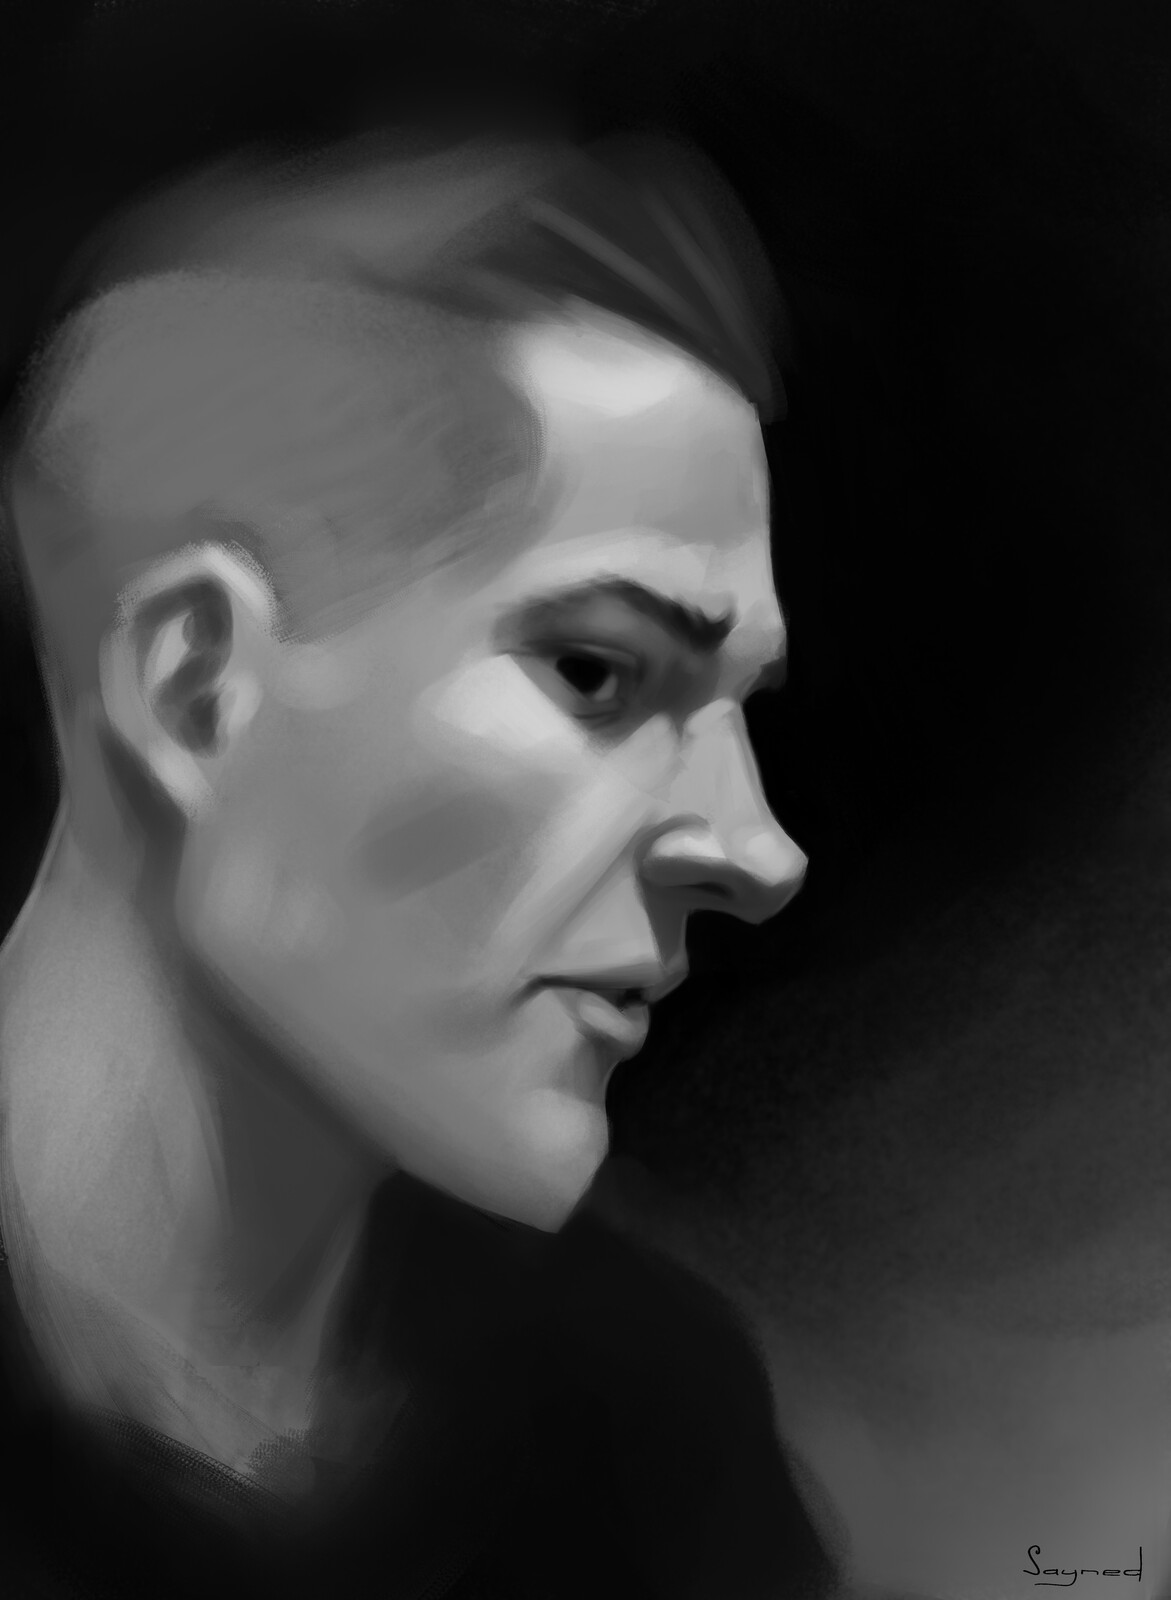 grayscale study, done using a single brush